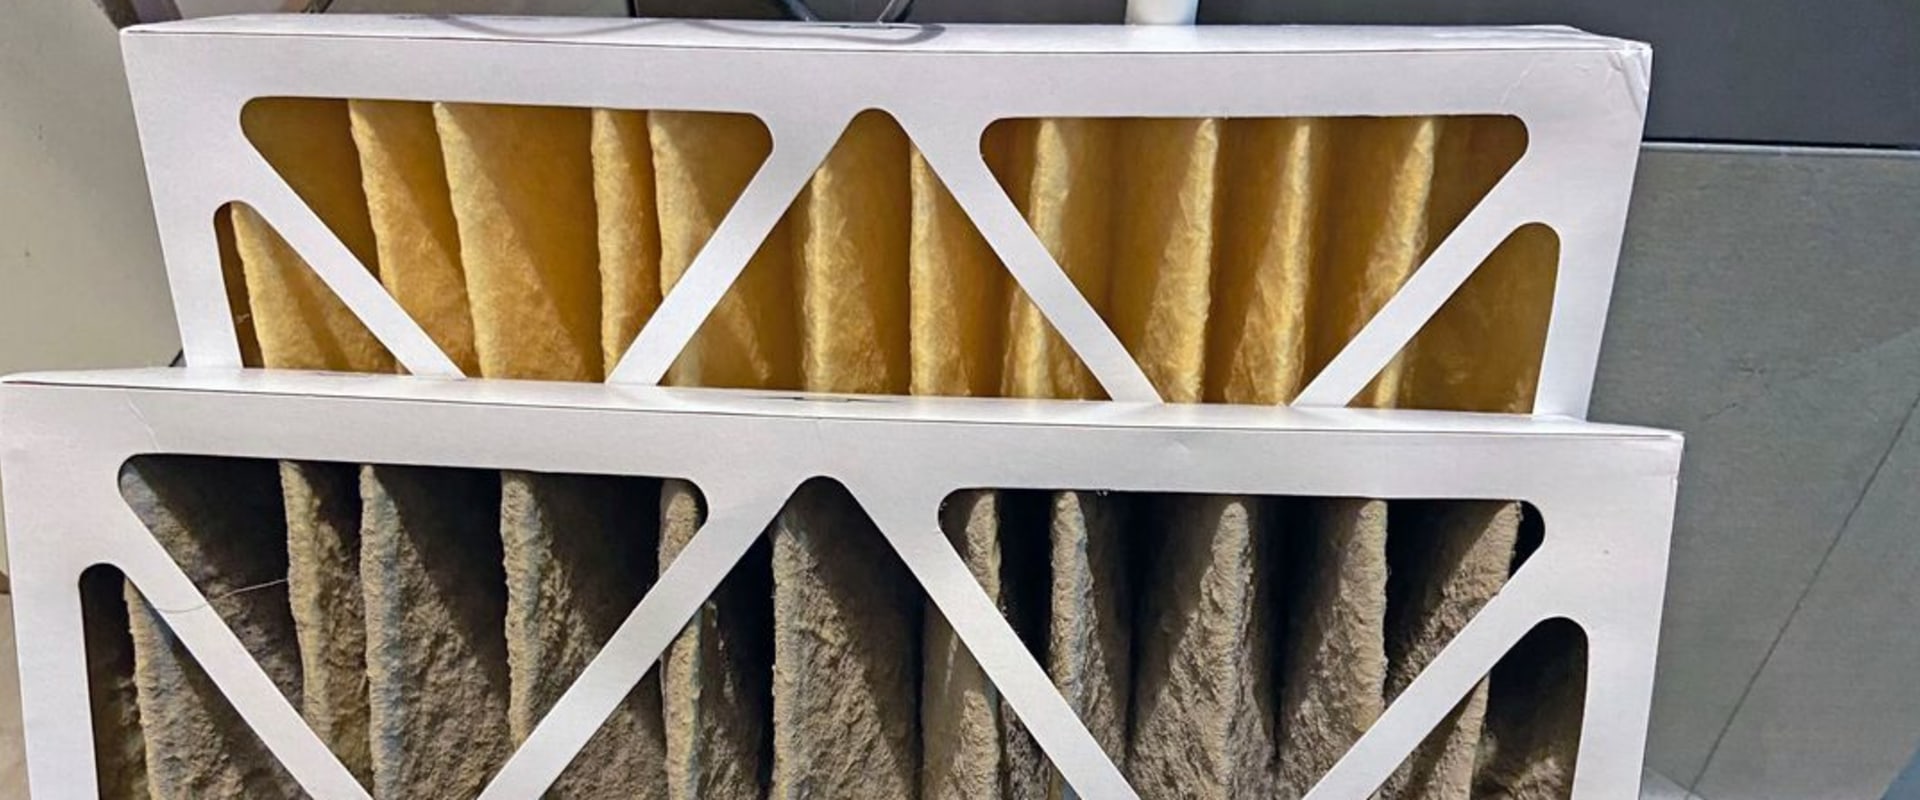 How Often Should You Change the Filter on a 1 Inch Furnace?